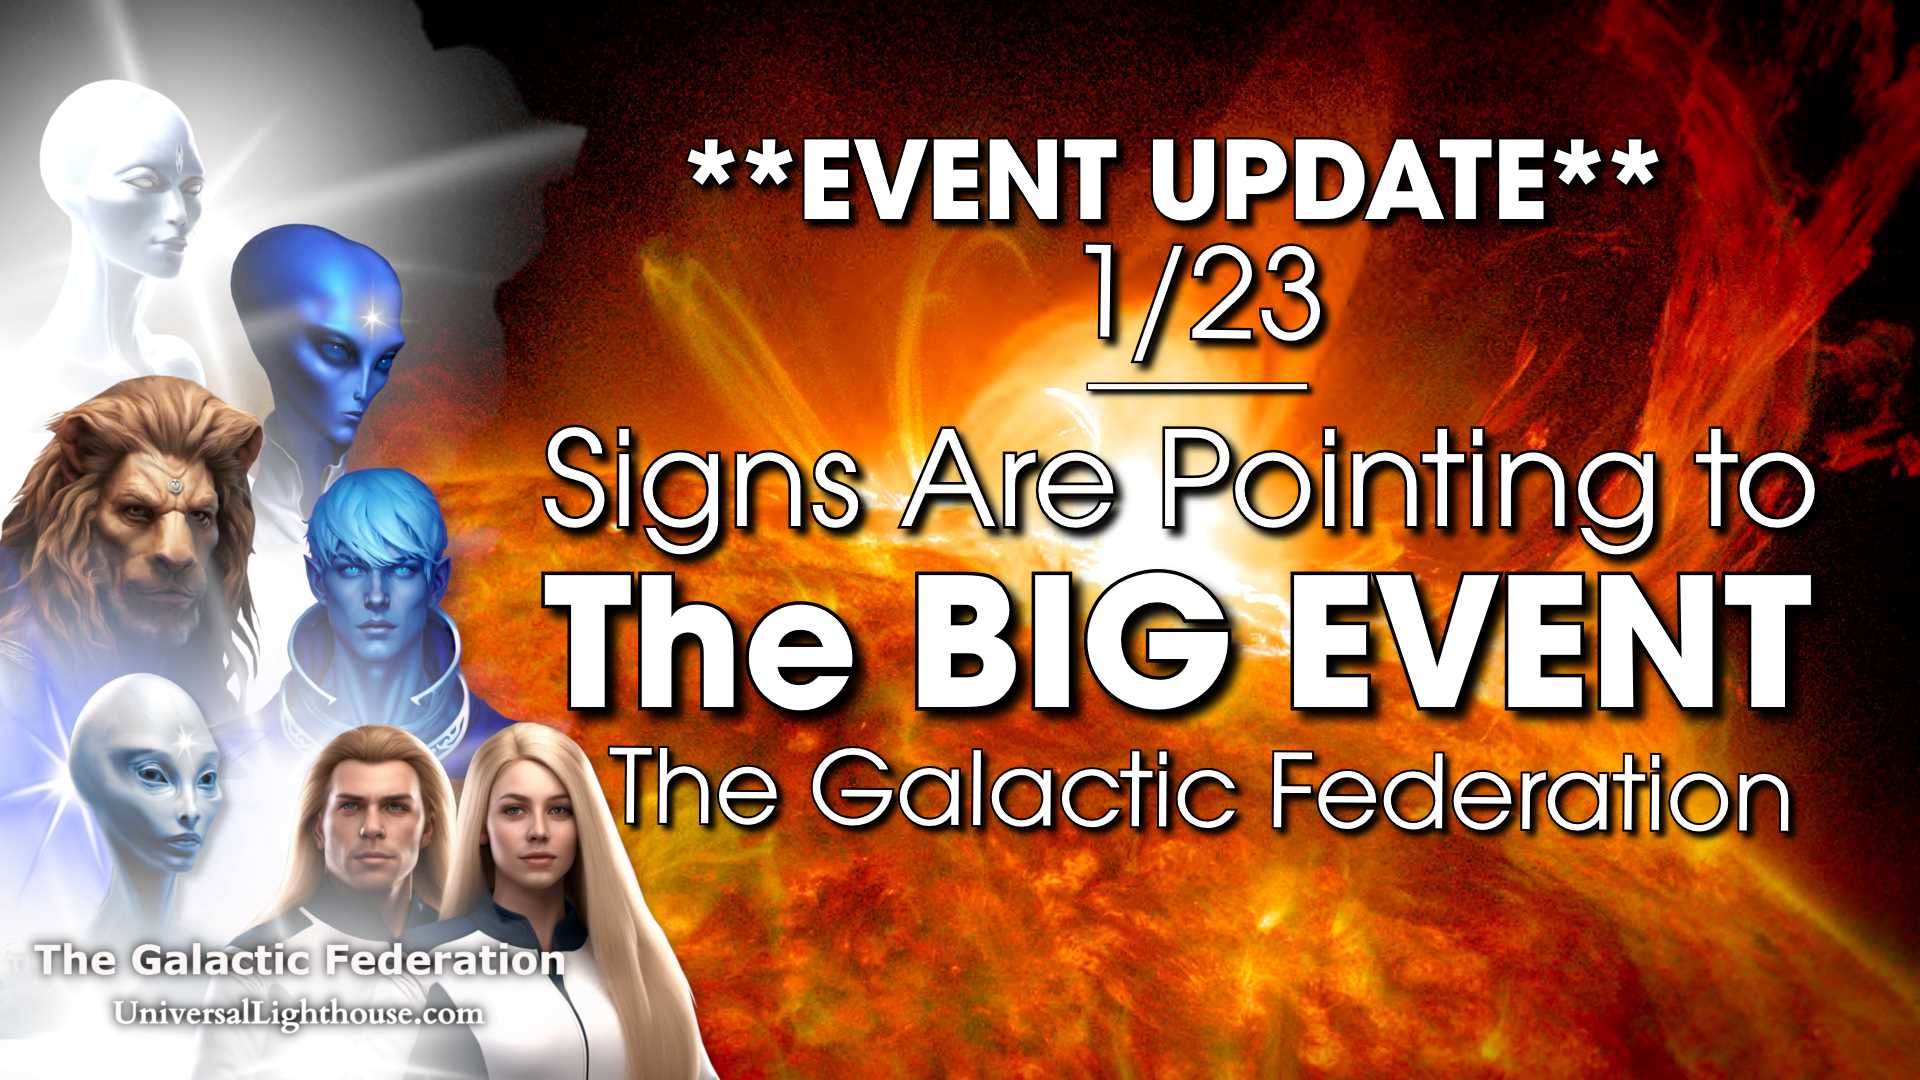 Signs Are Pointing to The BIG EVENT